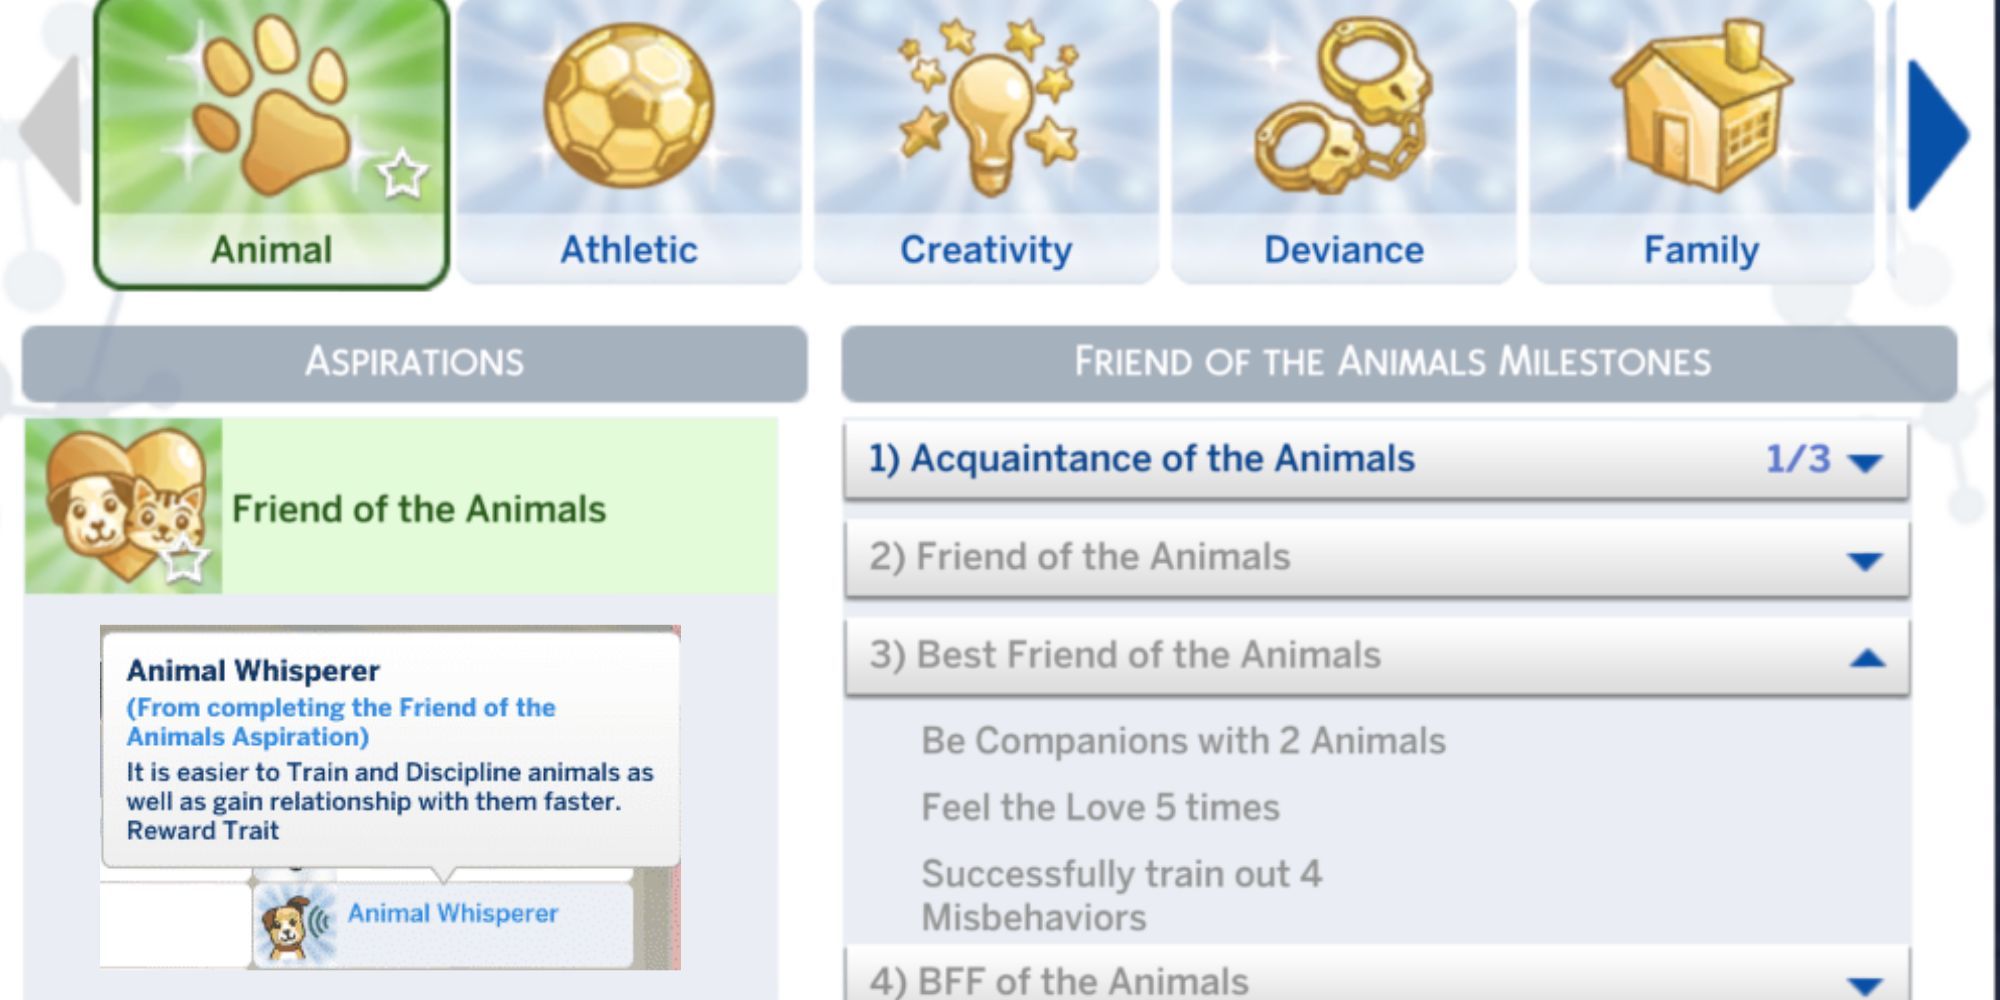 The Sims 4 Friend of the Animals Aspiration